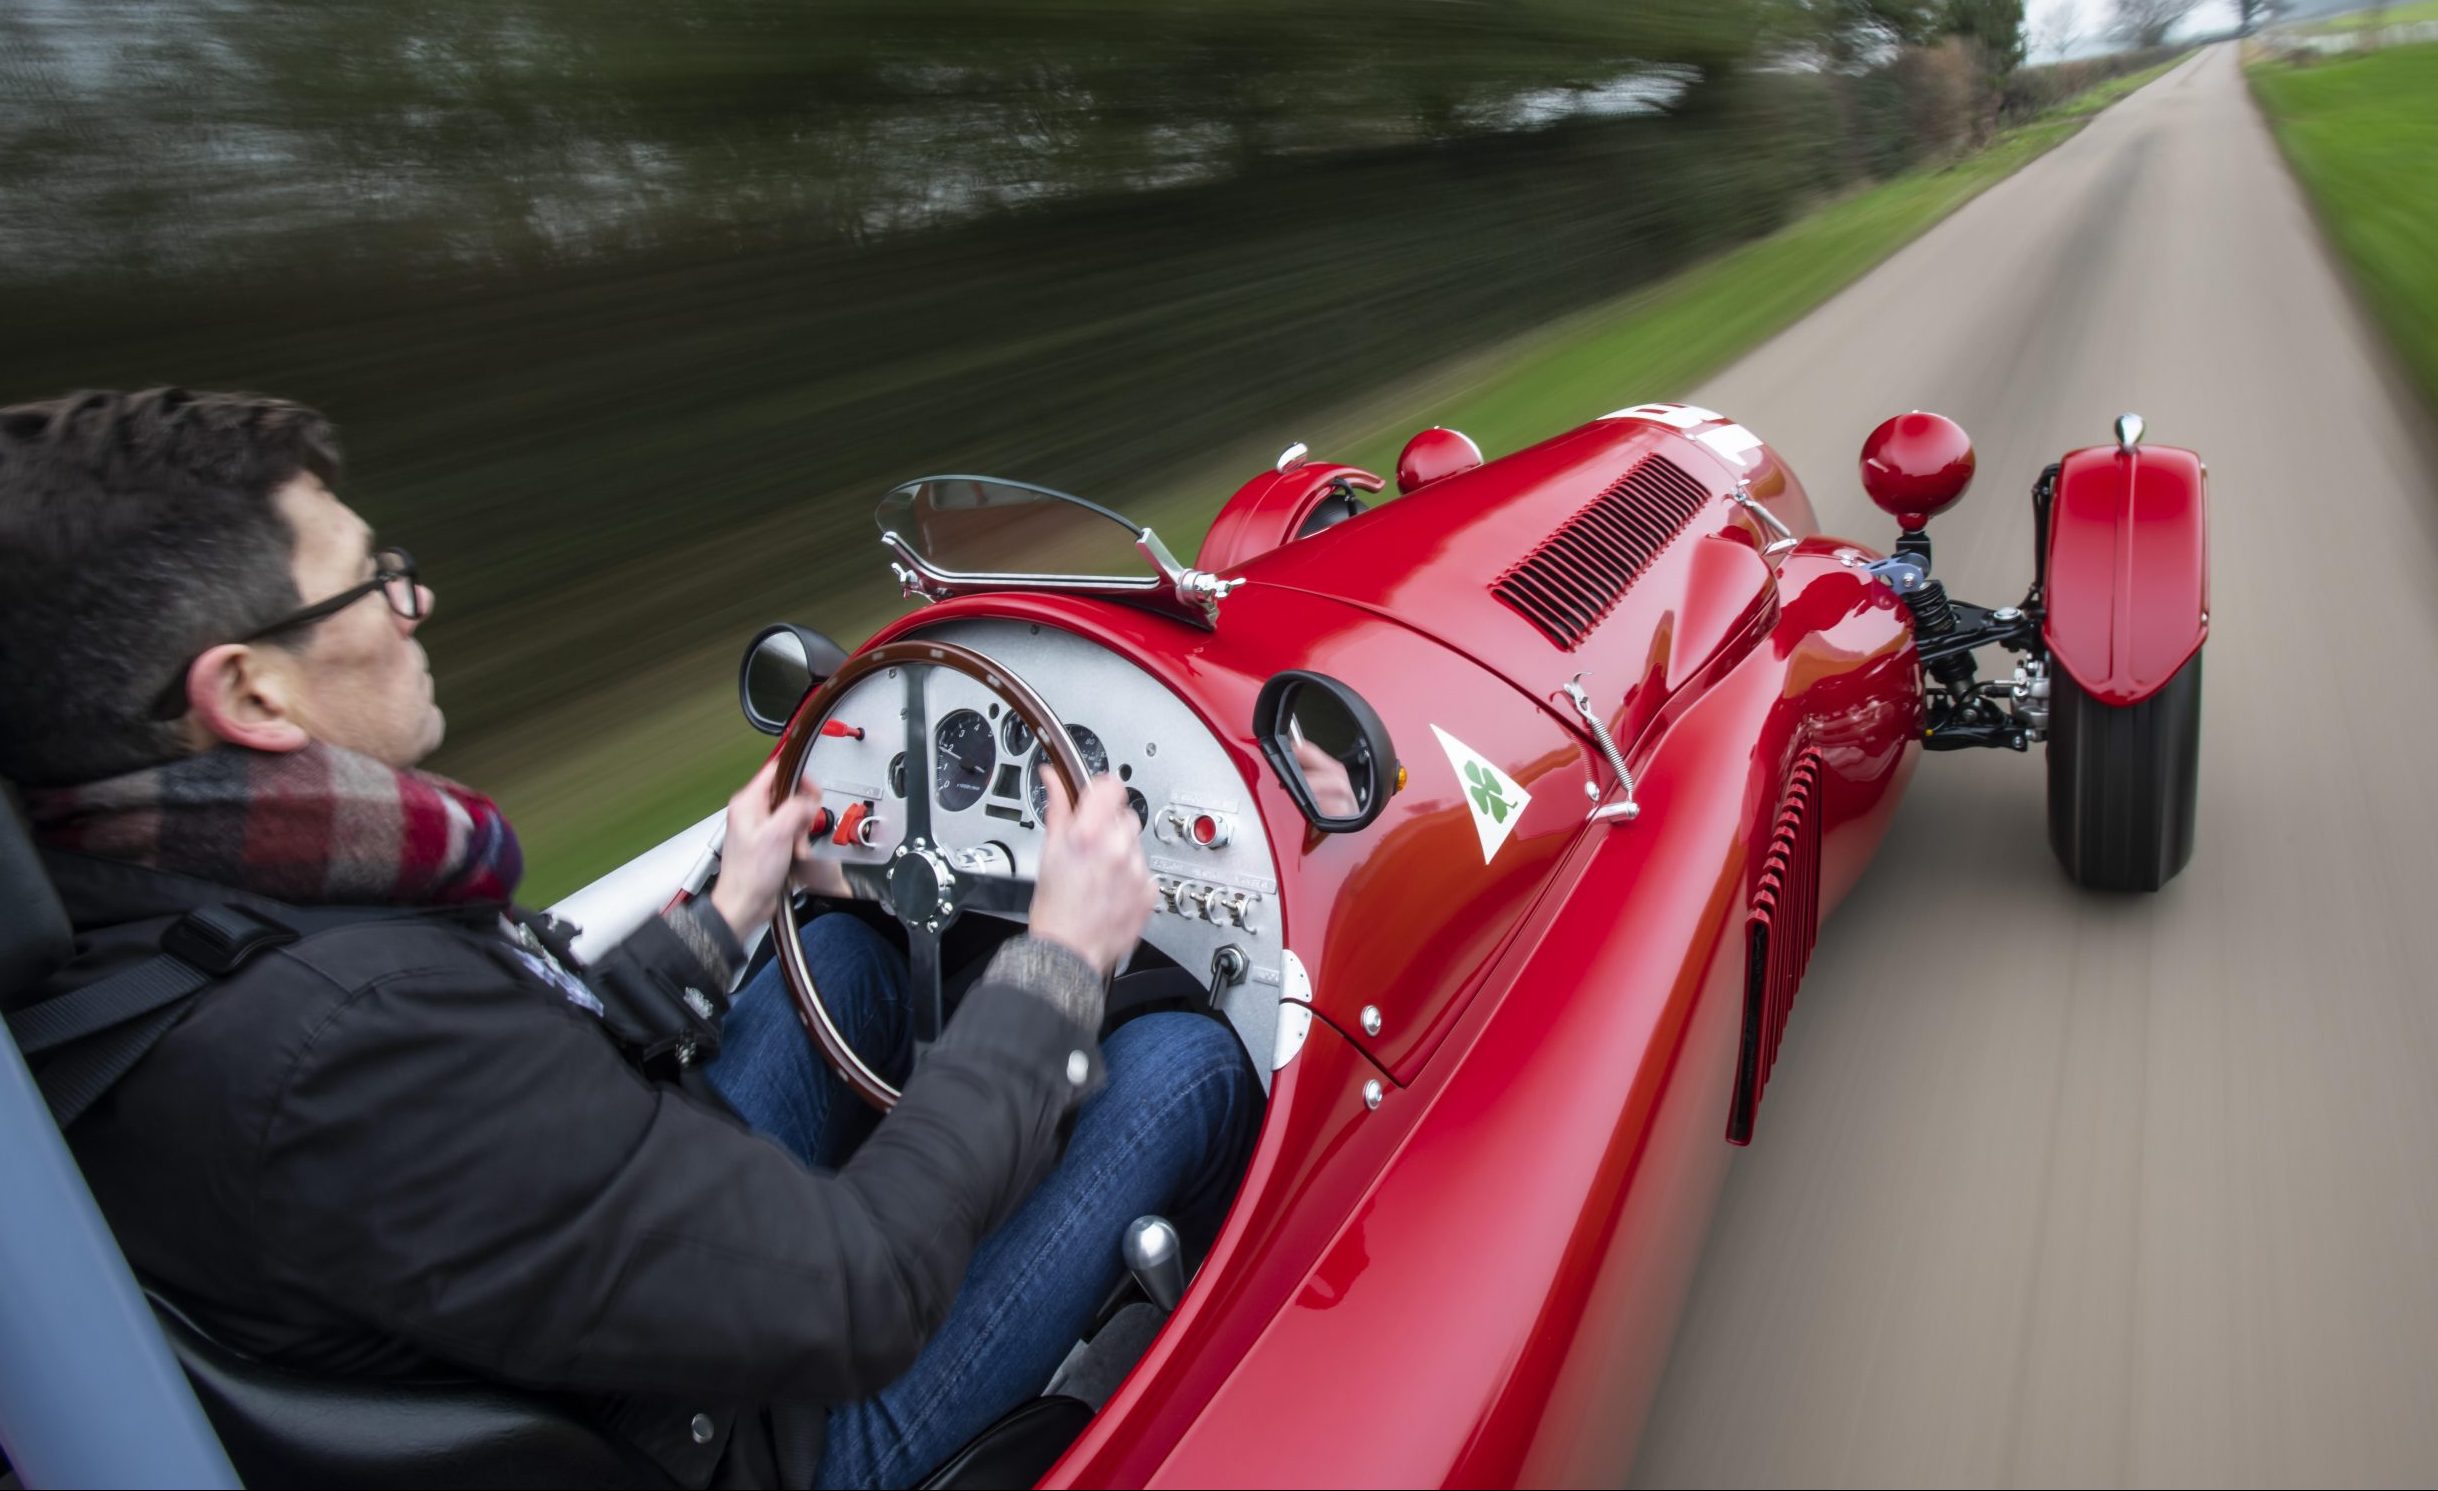 The Tipo 184 offers a taste of '30s Grand Prix racing – if you build it yourself